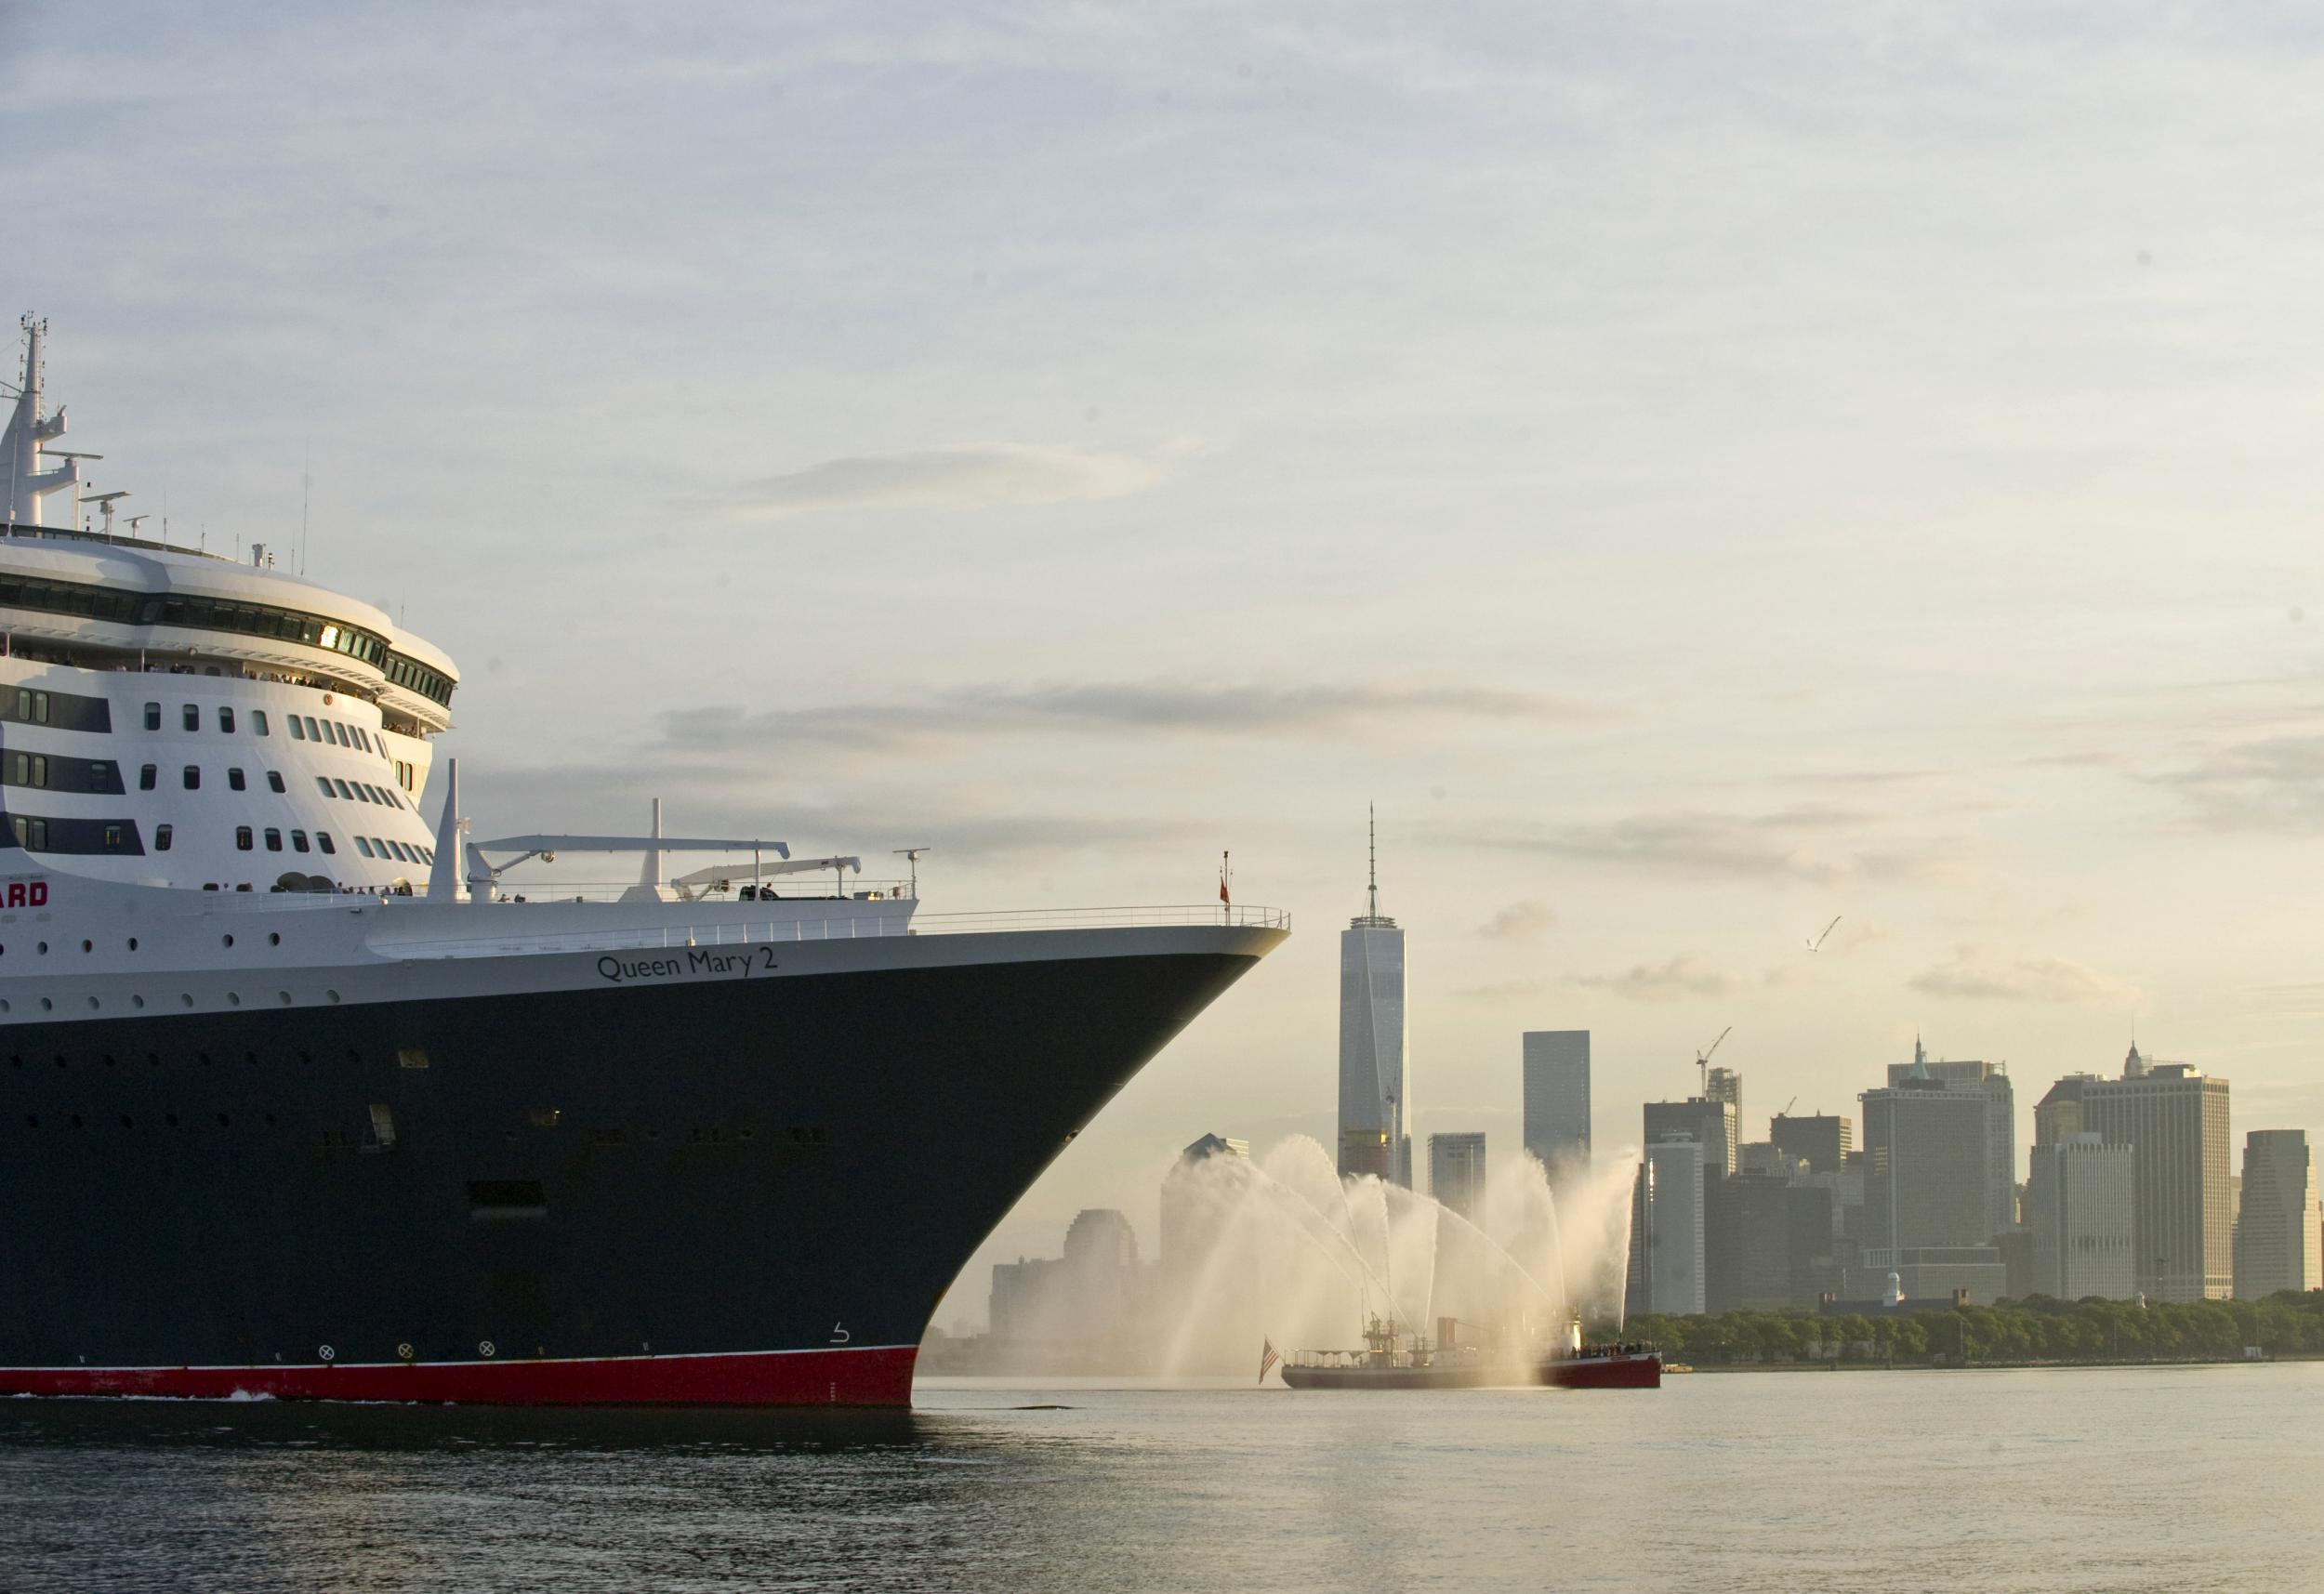 Make the famous trip across the pond on a Transatlantic cruise